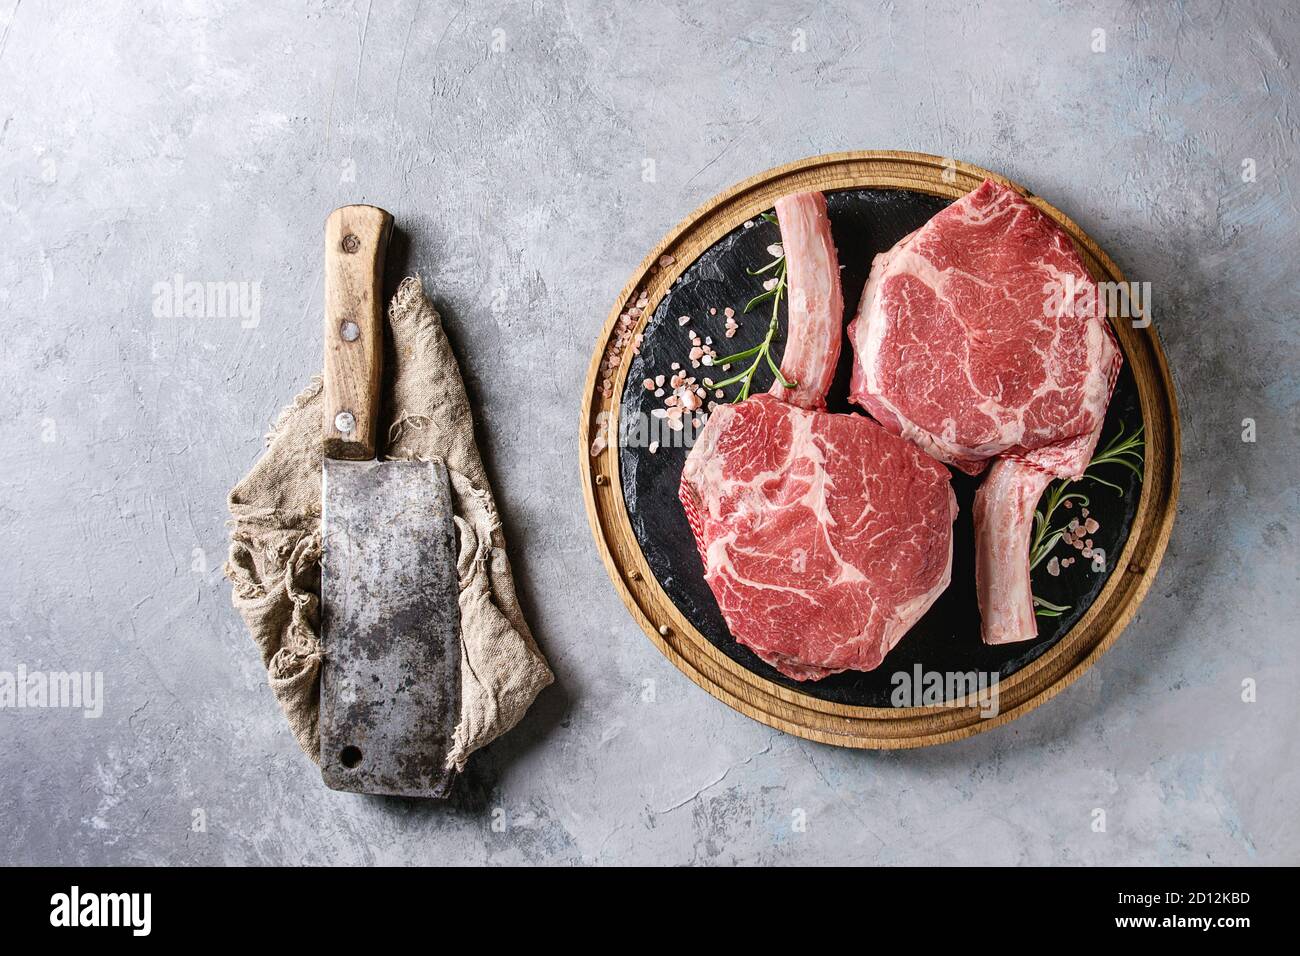 Raw uncooked black angus beef tomahawk steaks on bones served with salt, pepper, vintage butcher cleaver on round wooden slate cutting board over grey Stock Photo